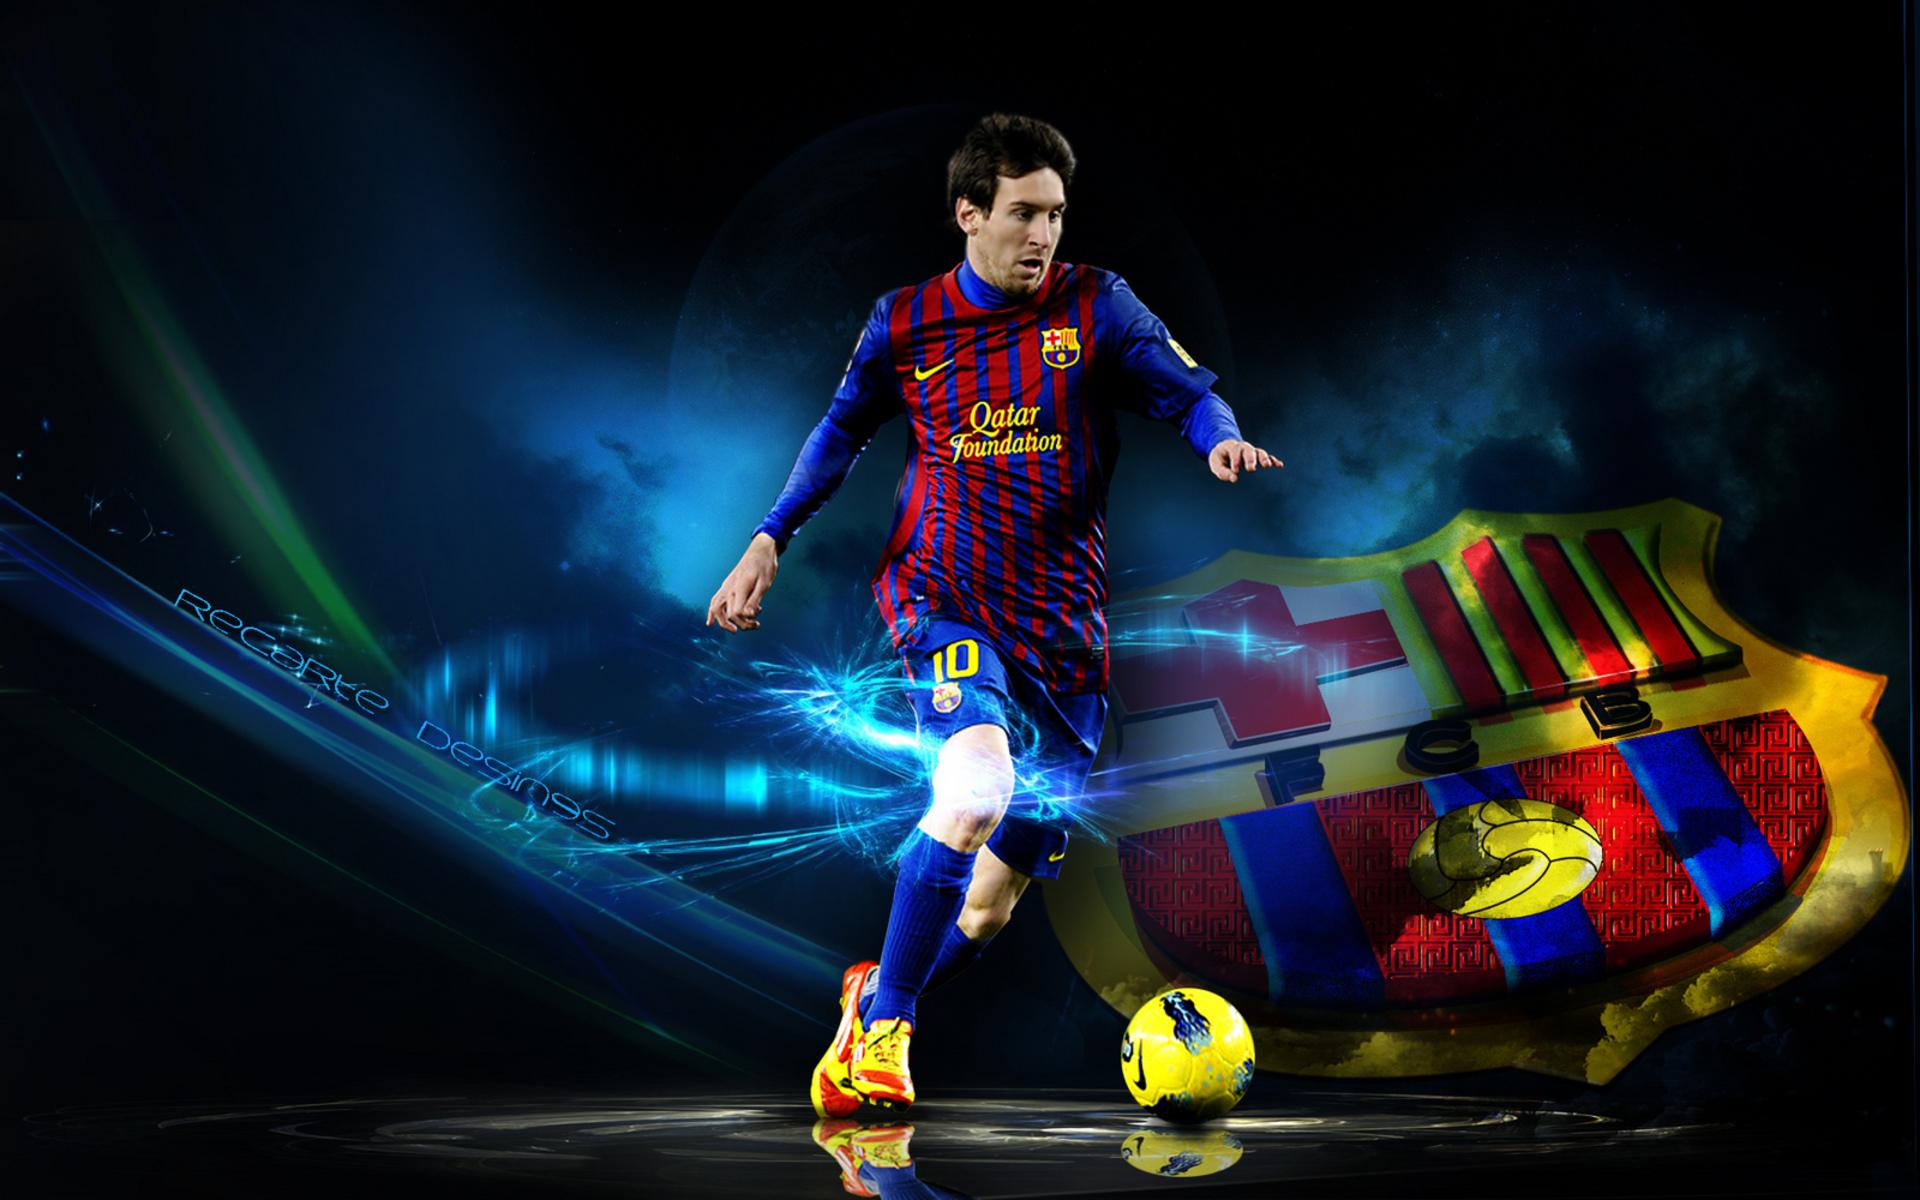 Download Football HD Wallpaper For Pc Gallery. Messi, Futebol